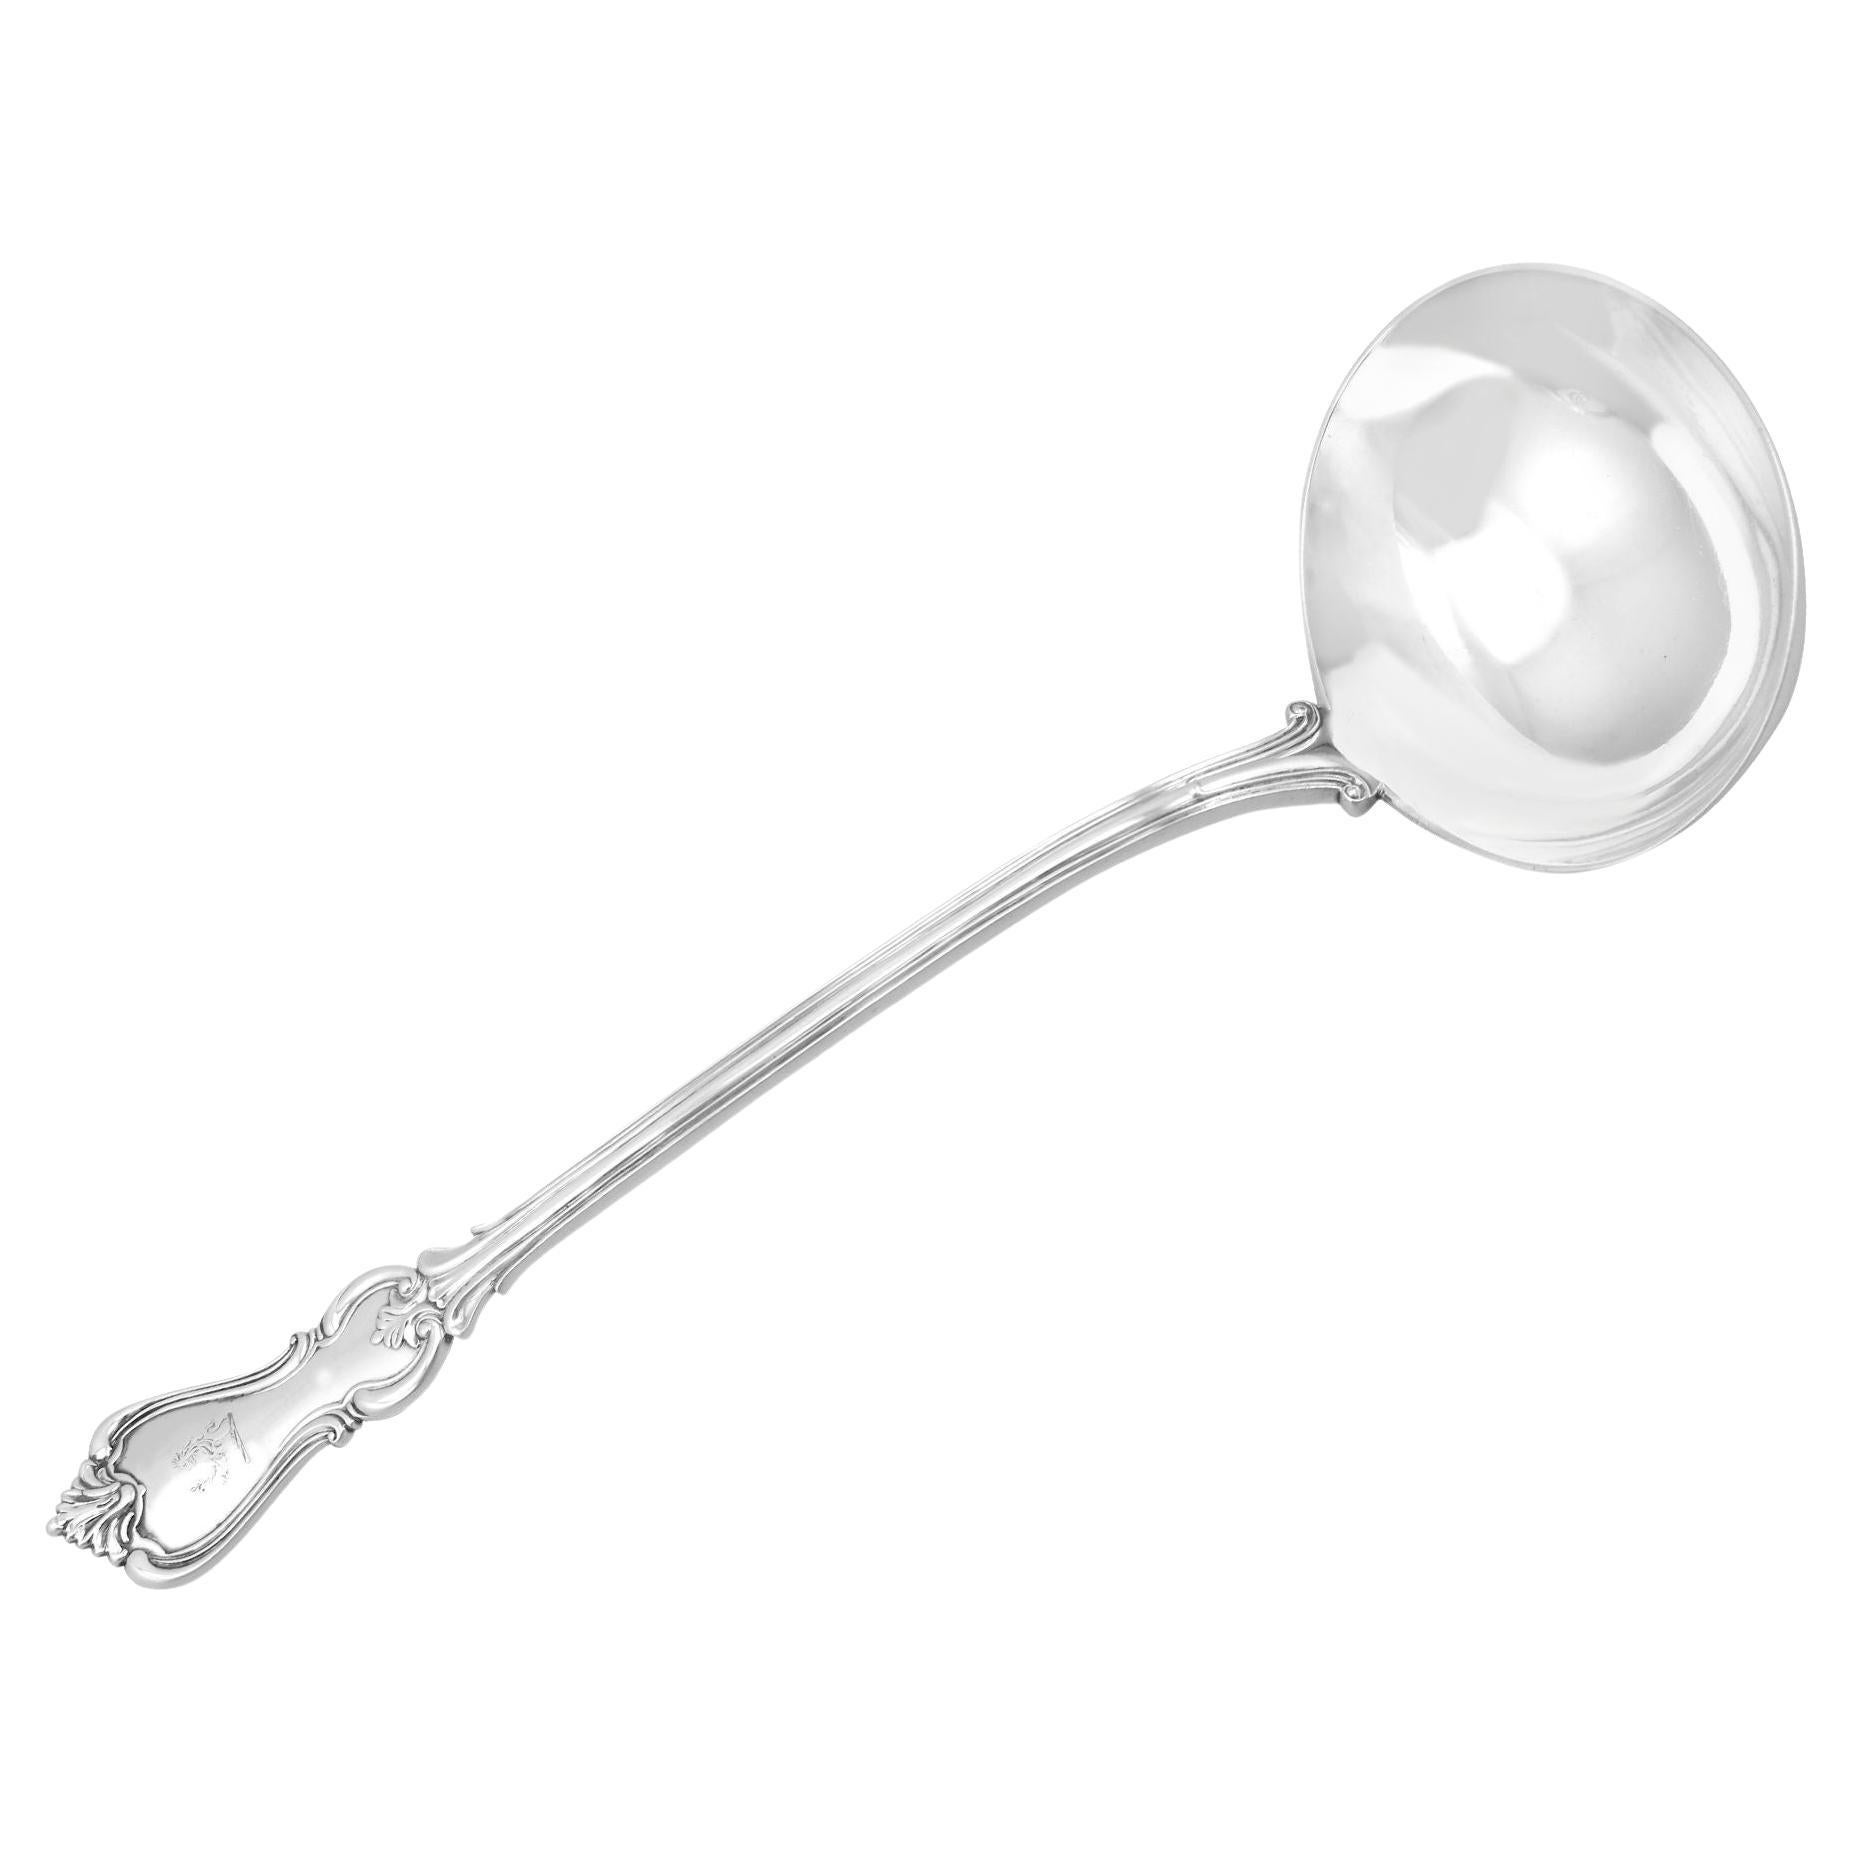 Victorian English Sterling Silver Soup Ladle